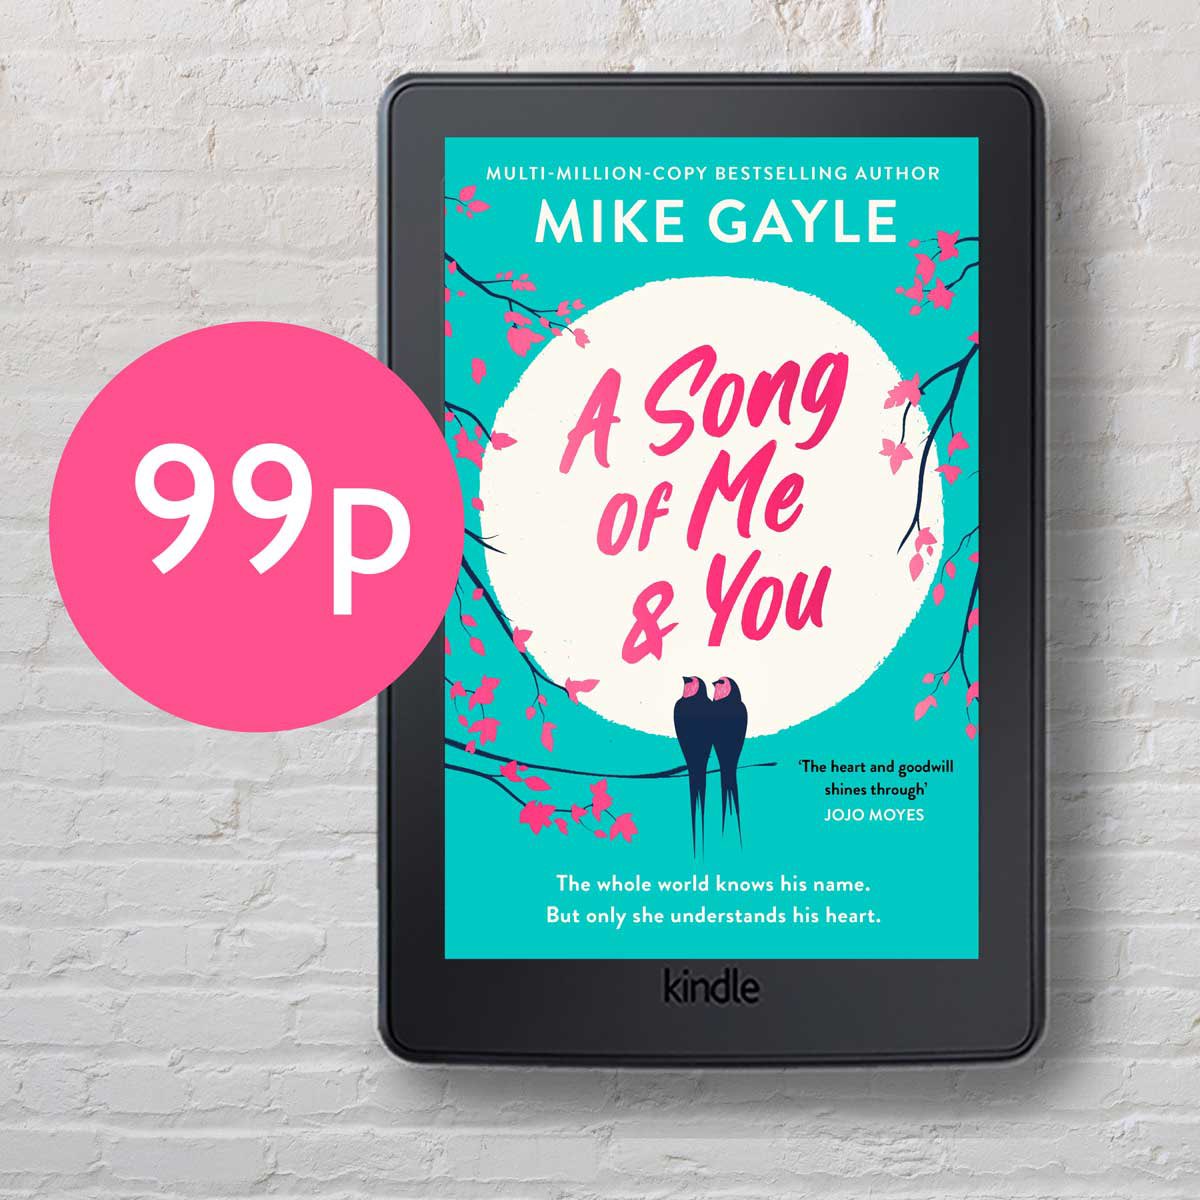 FOR A LIMITED TIME ONLY!!! Grab the heartfelt and romantic Richard and Judy Book Club pick, A Song of Me and You for just 99p!!!                                                               
#https://tr.ee/xyOMJiYZNdmikegayle #kindleunlimited #kindledeals #richardandjudybookclub